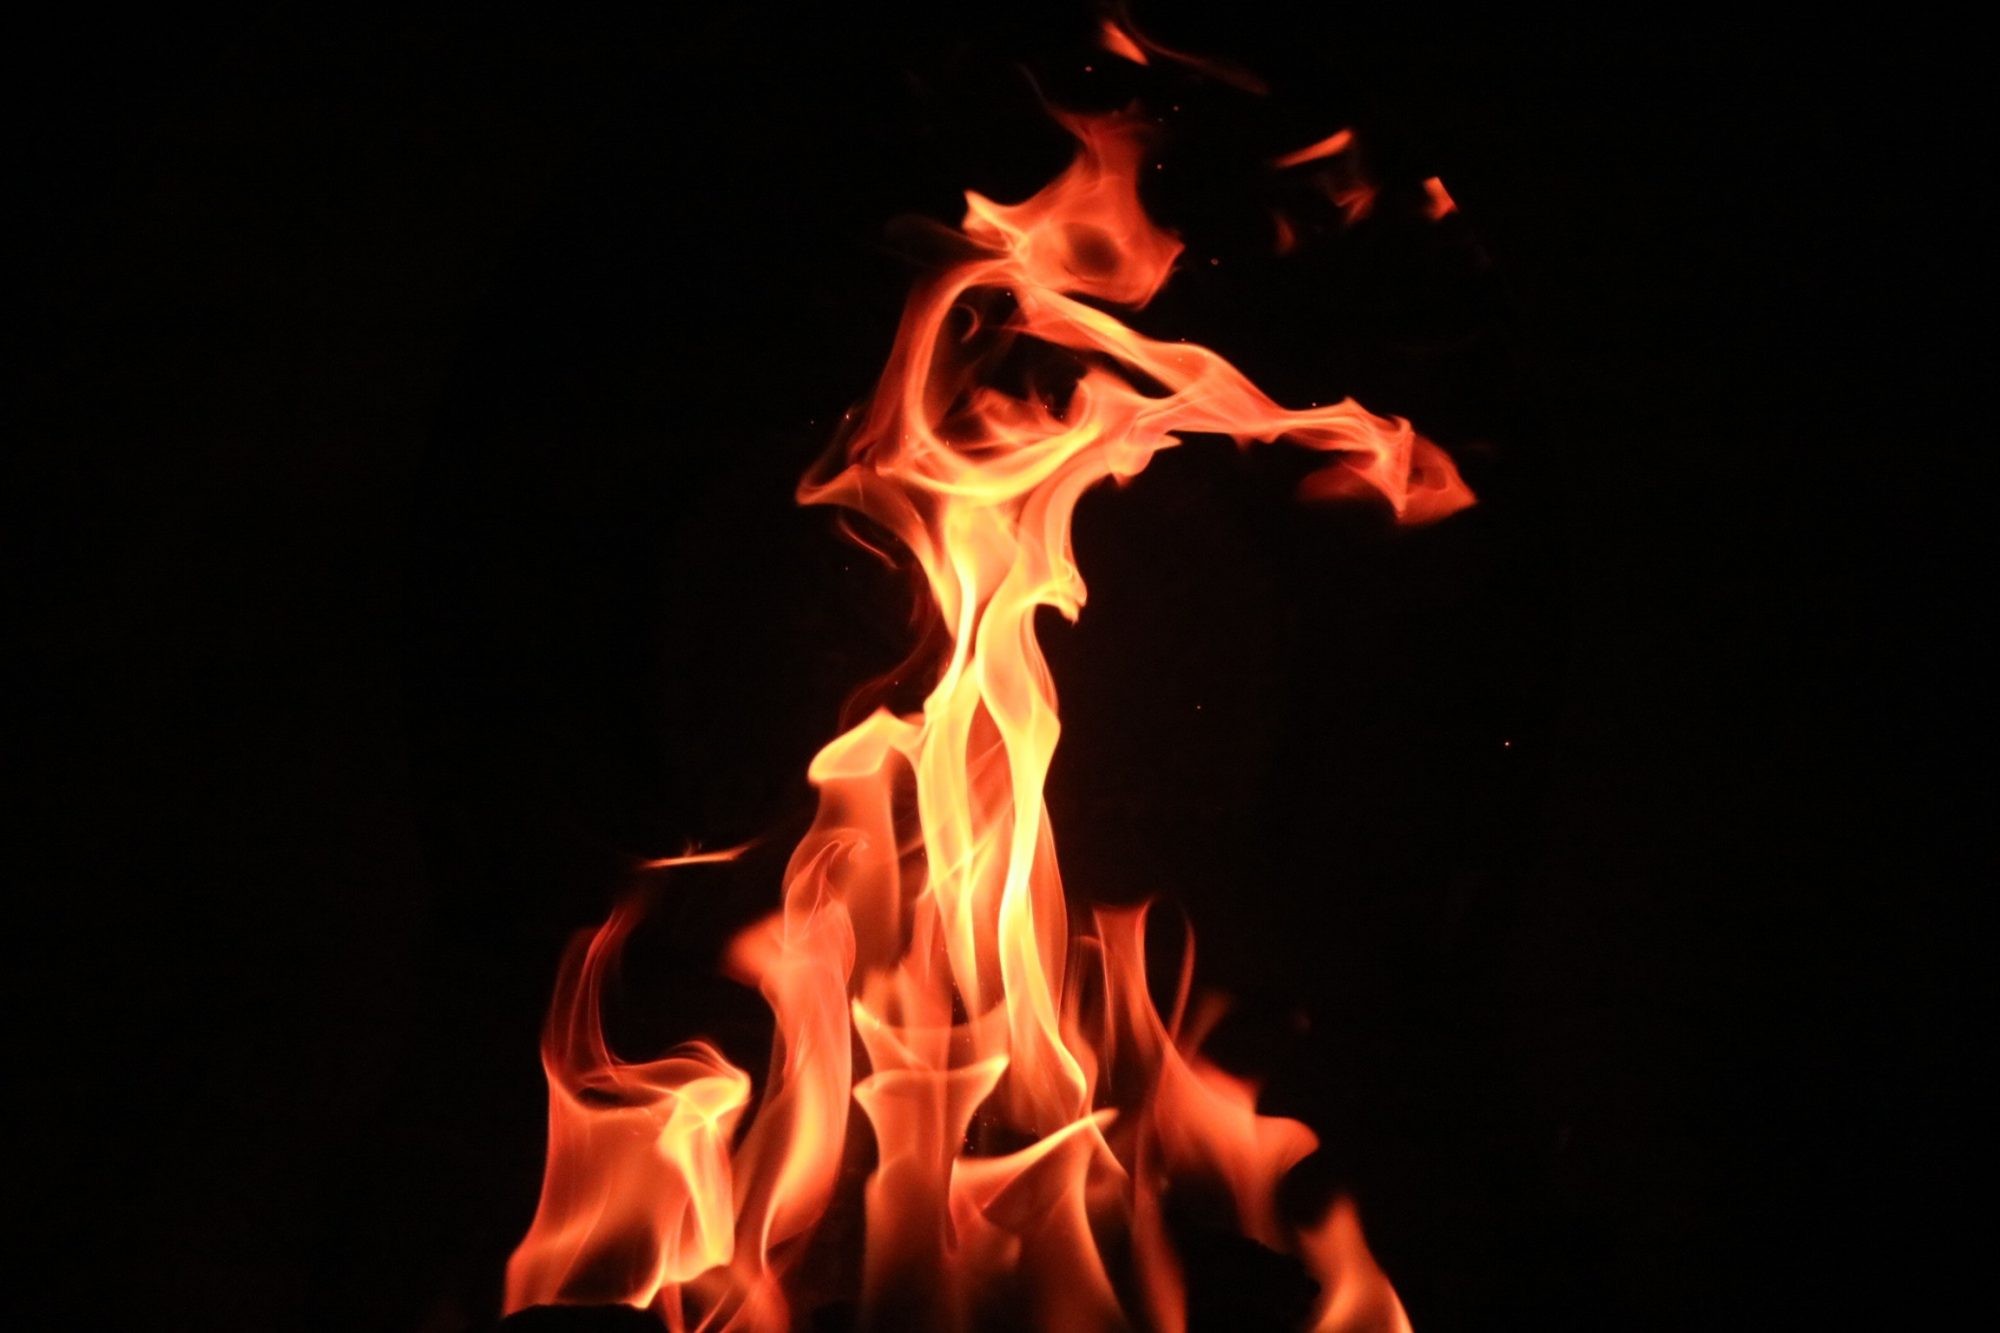 Detail Image Of A Fire Nomer 2